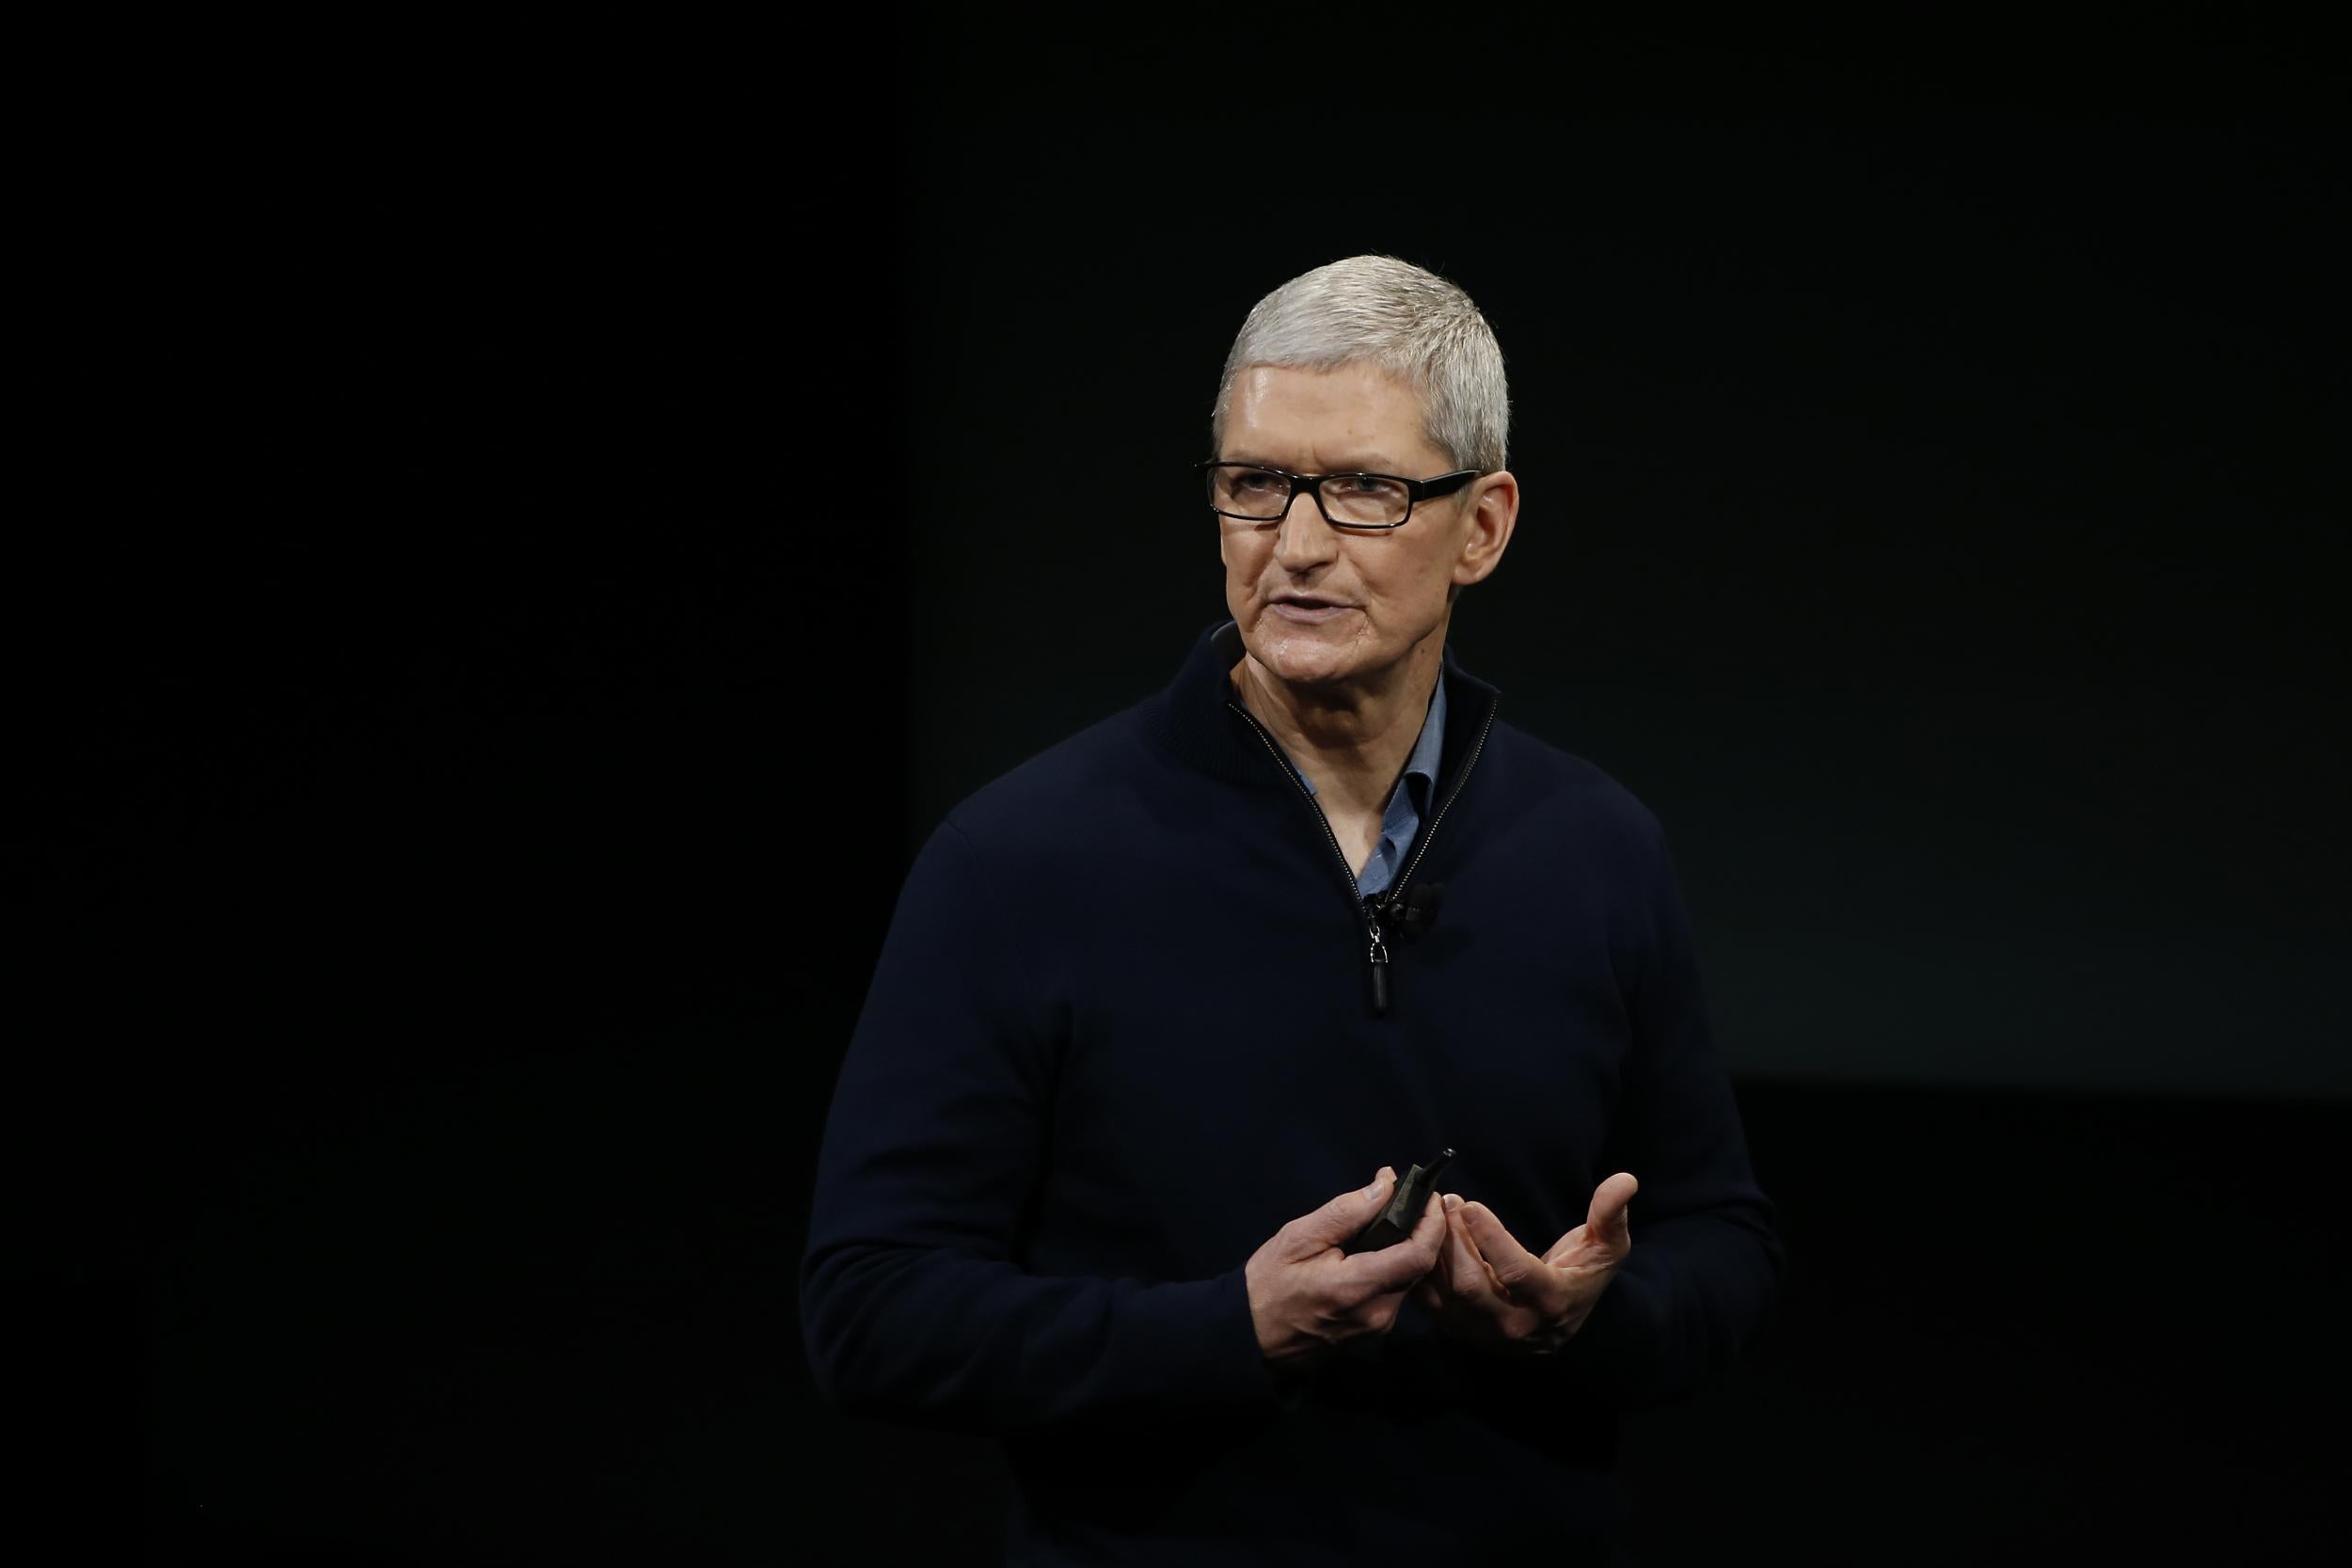 Mr Cook has never before openly outlined Apple’s plans